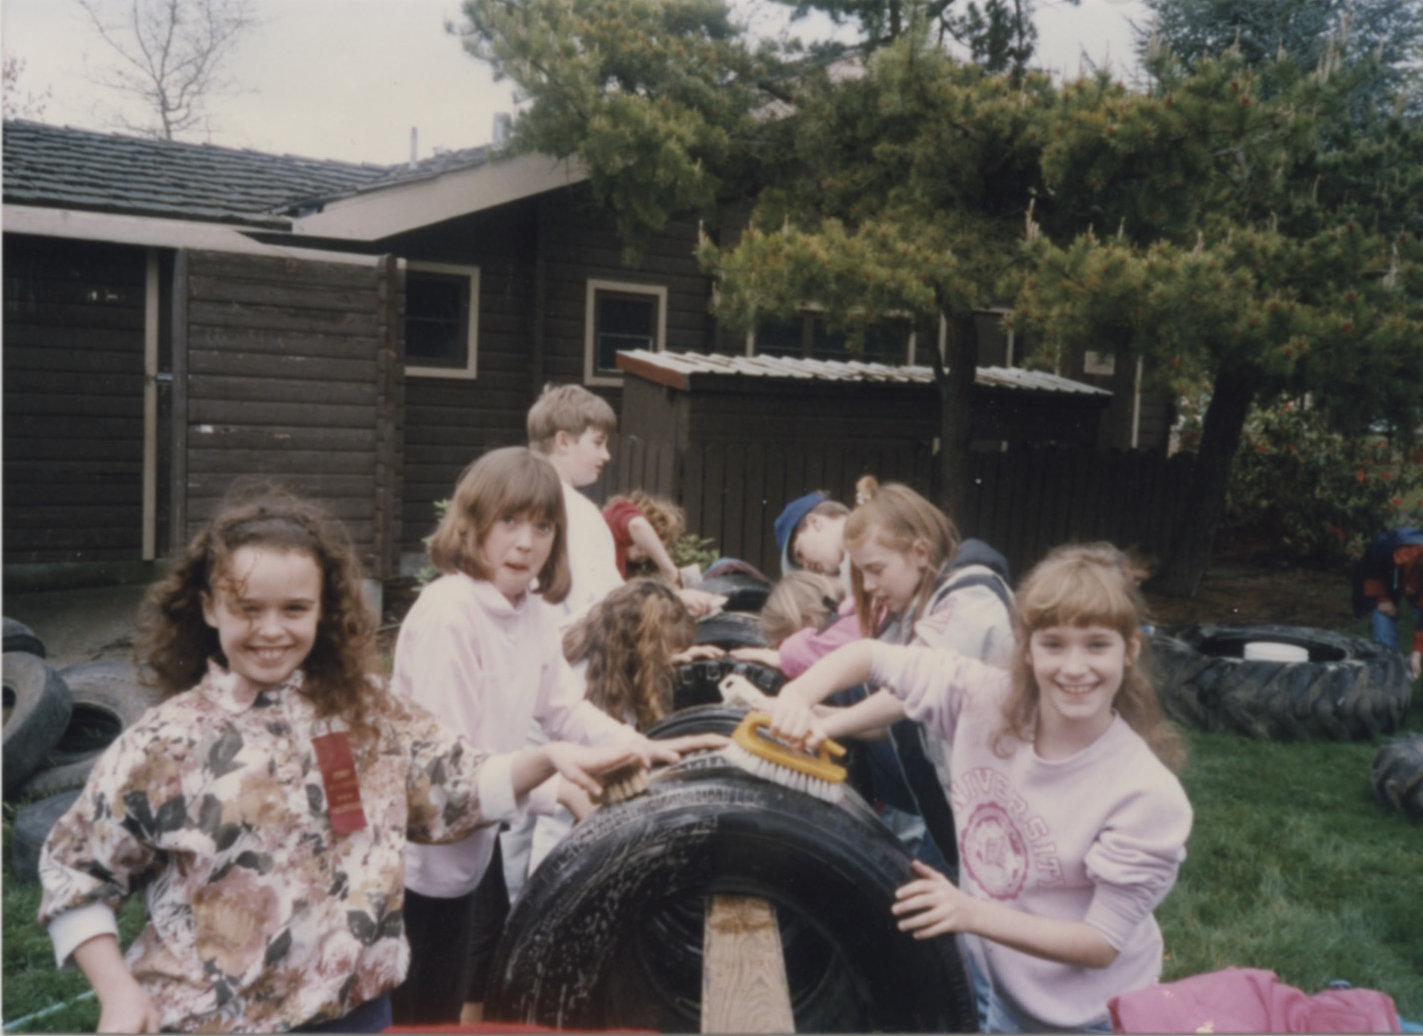 Kids help scrub tires clean during the original construction of Penny Playground.